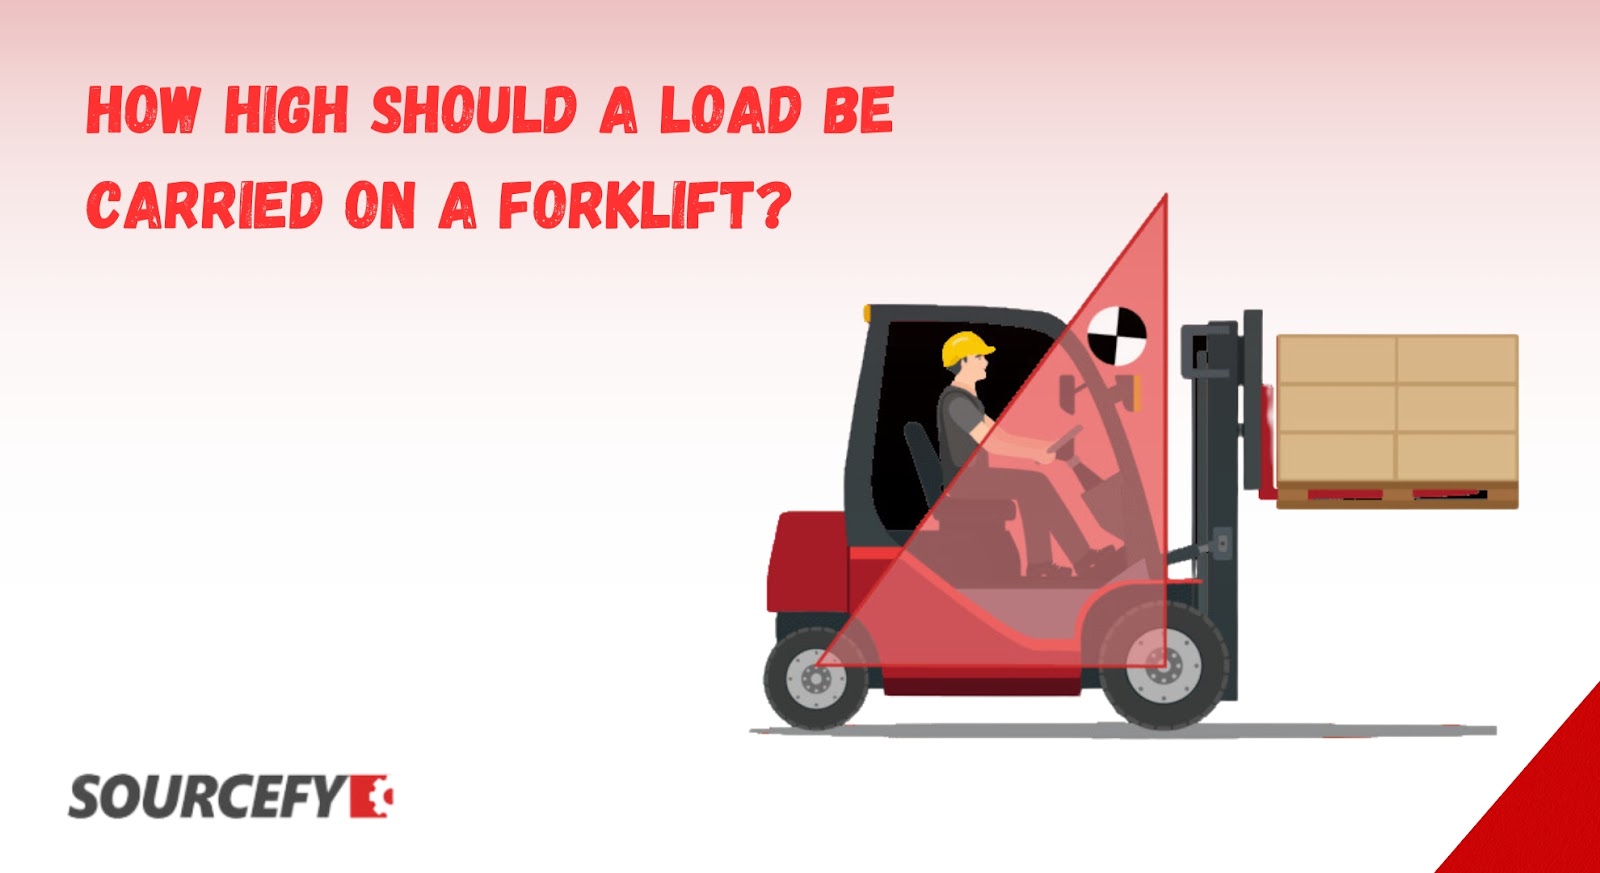 How High Should a Load Be Carried on a Forklift?